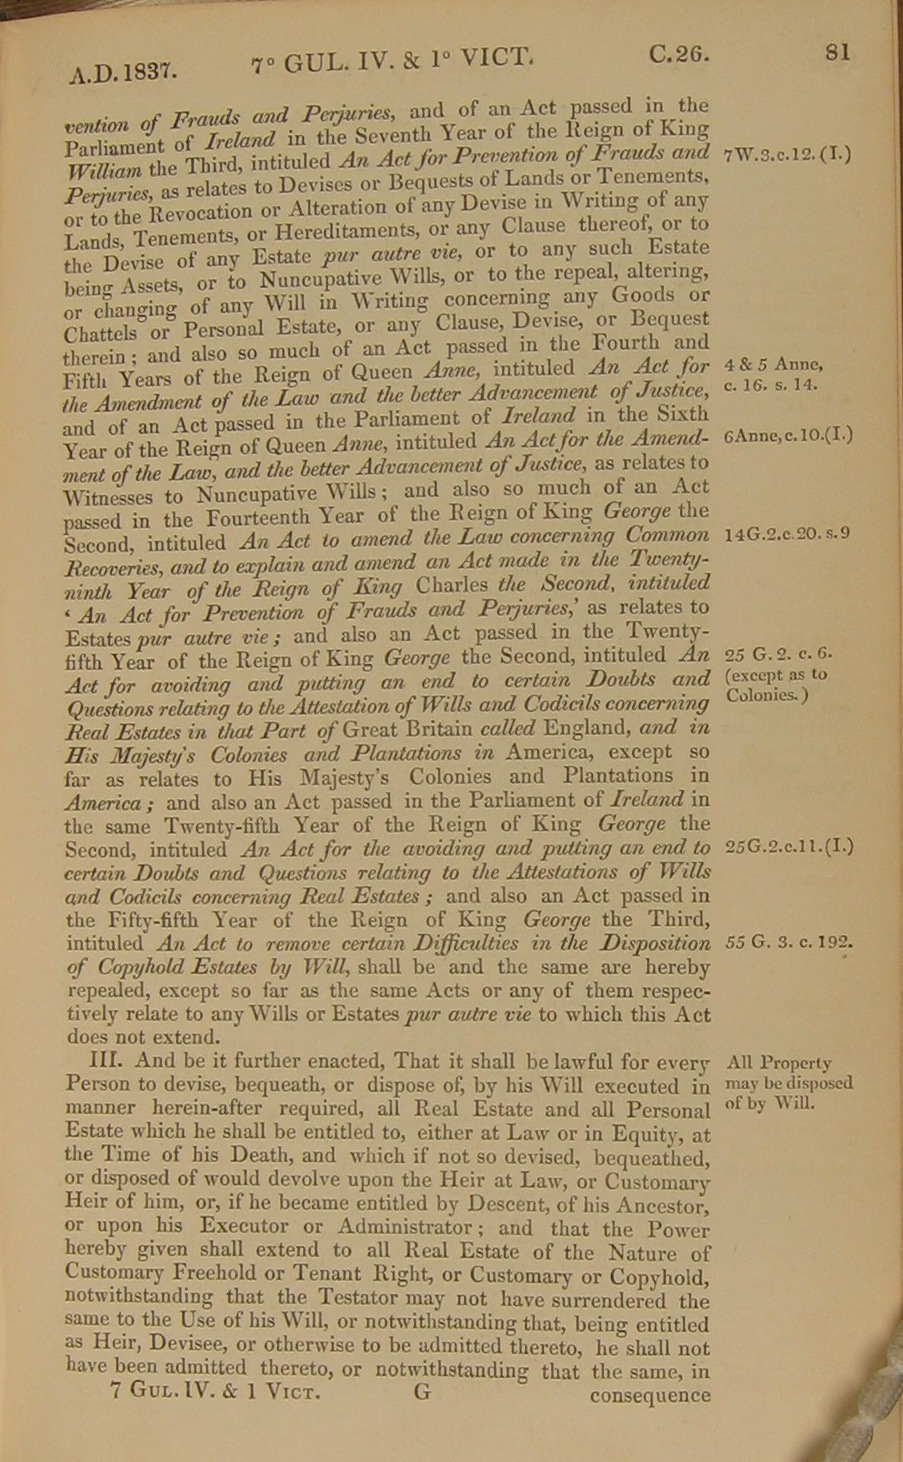 Image of 7 William IV and 1 Victoria I, c. 26 (page 2 of 9). Click for larger image.